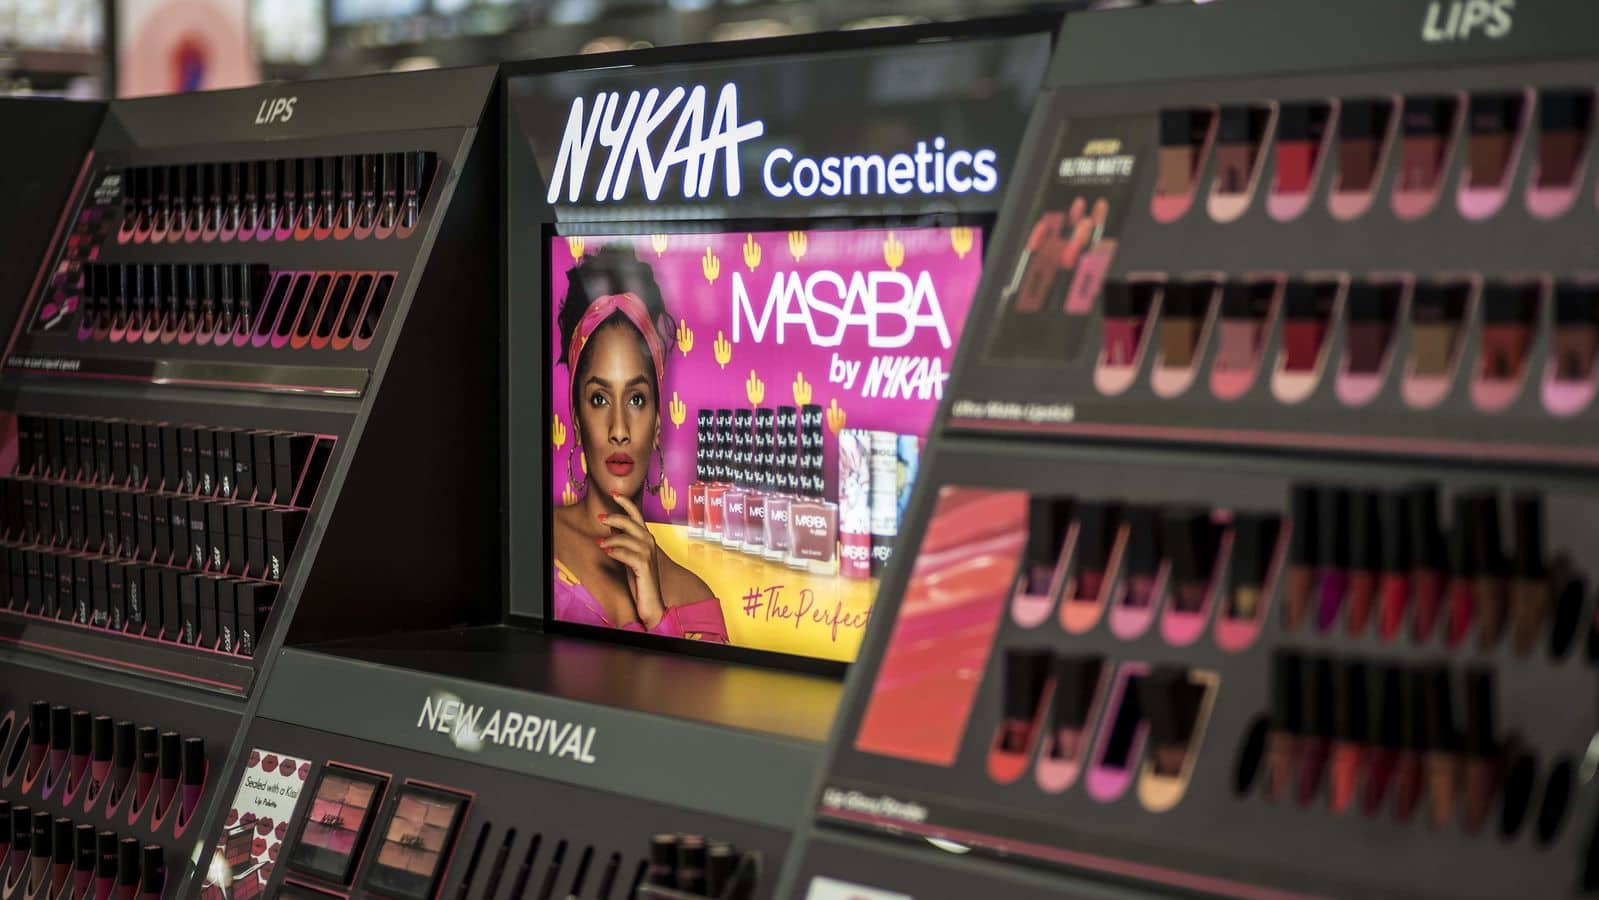 FSN E-Commerce Ventures Nykaa’s shares fell 2 percent on Tuesday, falling below their IPO price of Rs 1,125 as the IPO anchor lock-in ends on November 10. The stock was trading 2.75 percent lower on the NSE at Rs. 1,112.40/piece at 1:15 p.m. The stock has dropped 2% in the last five trading days and 11% in the last month.